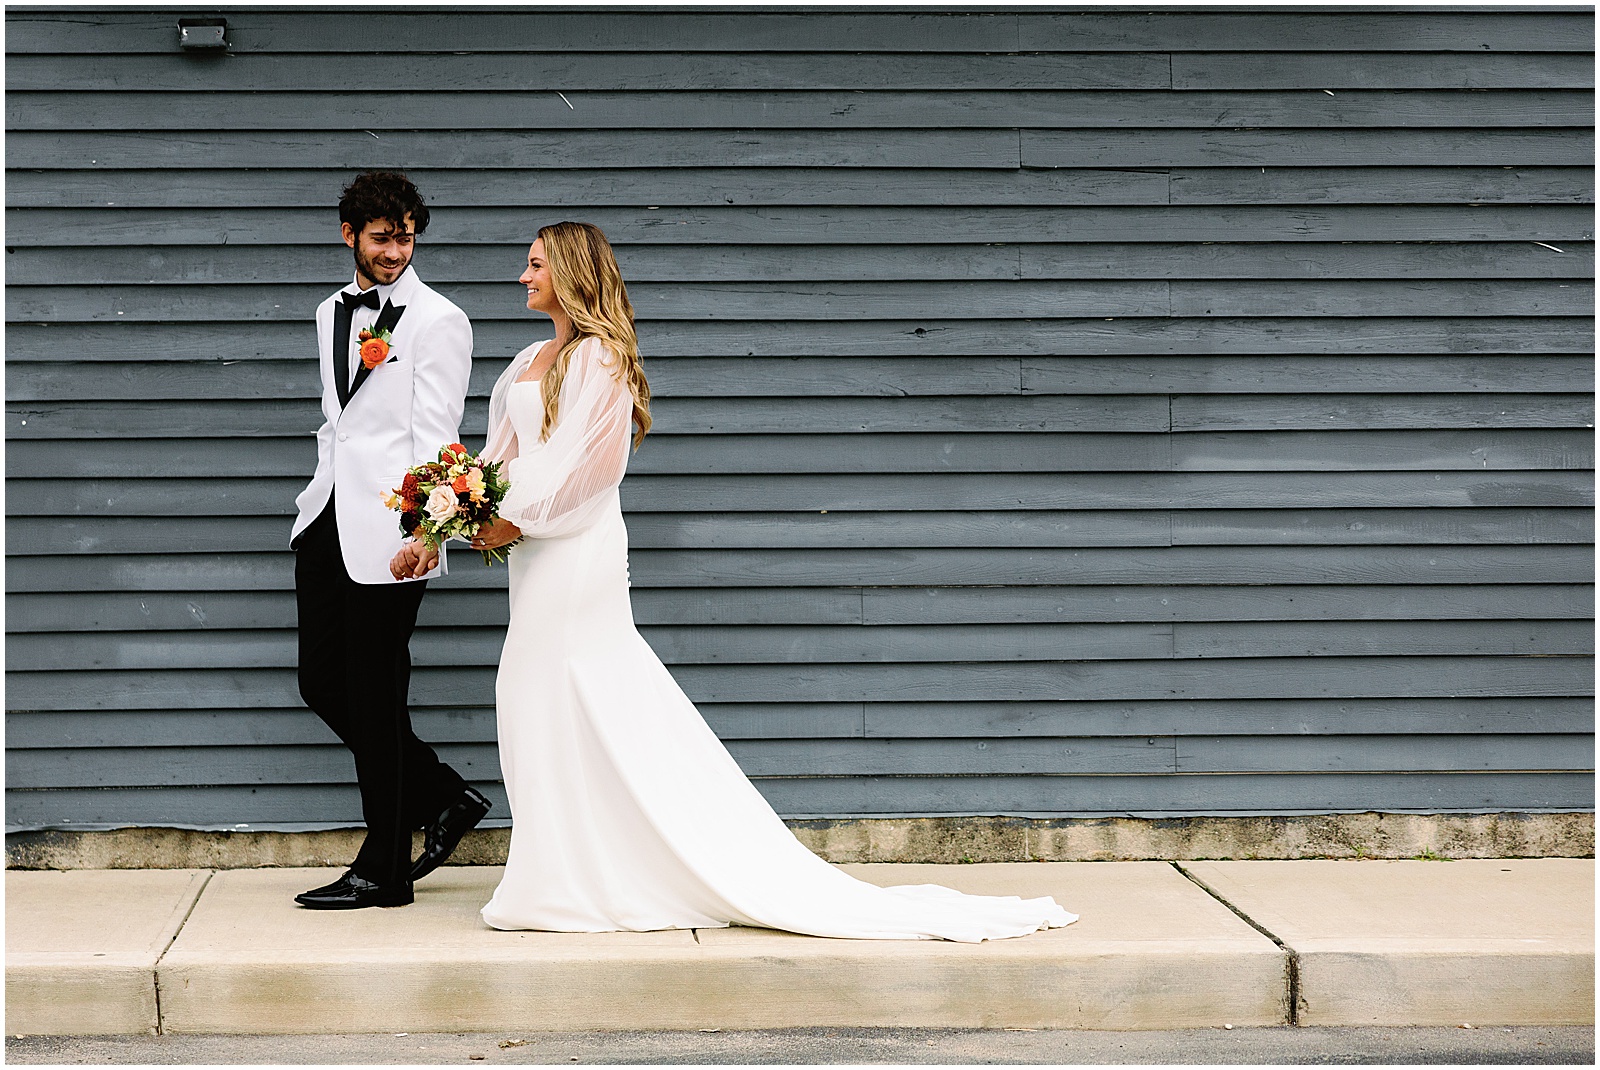 A bride and groom walk past Parker's Garage LBI after their wedding ceremony.